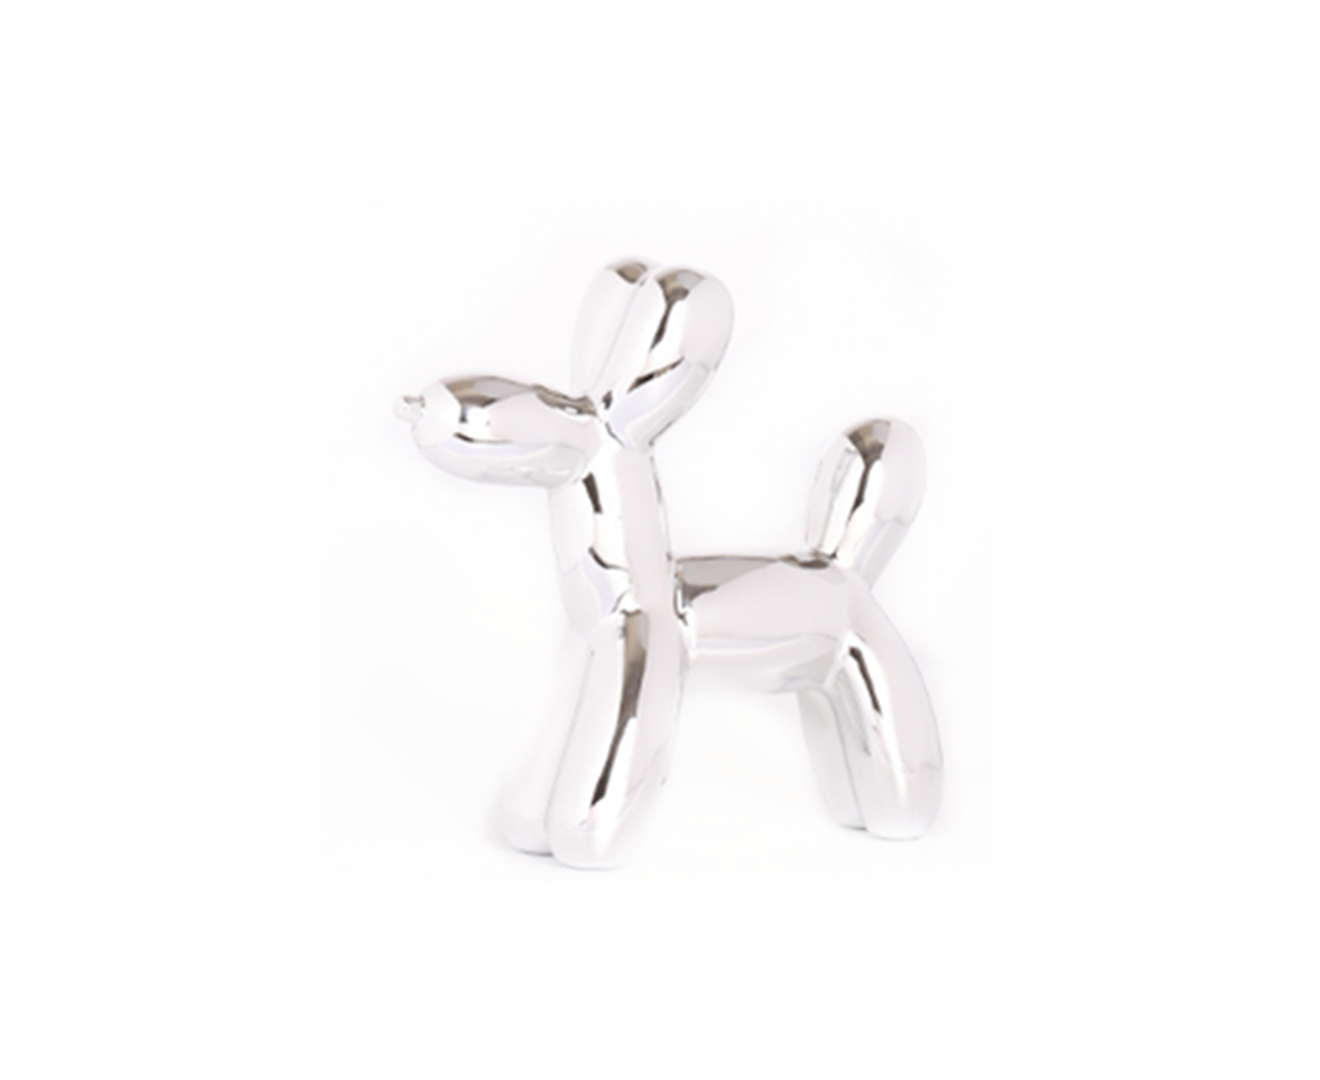 Balloon Dog Money Bank,Unique Ceramic Piggy Bank With High-Gloss Finish - Silver